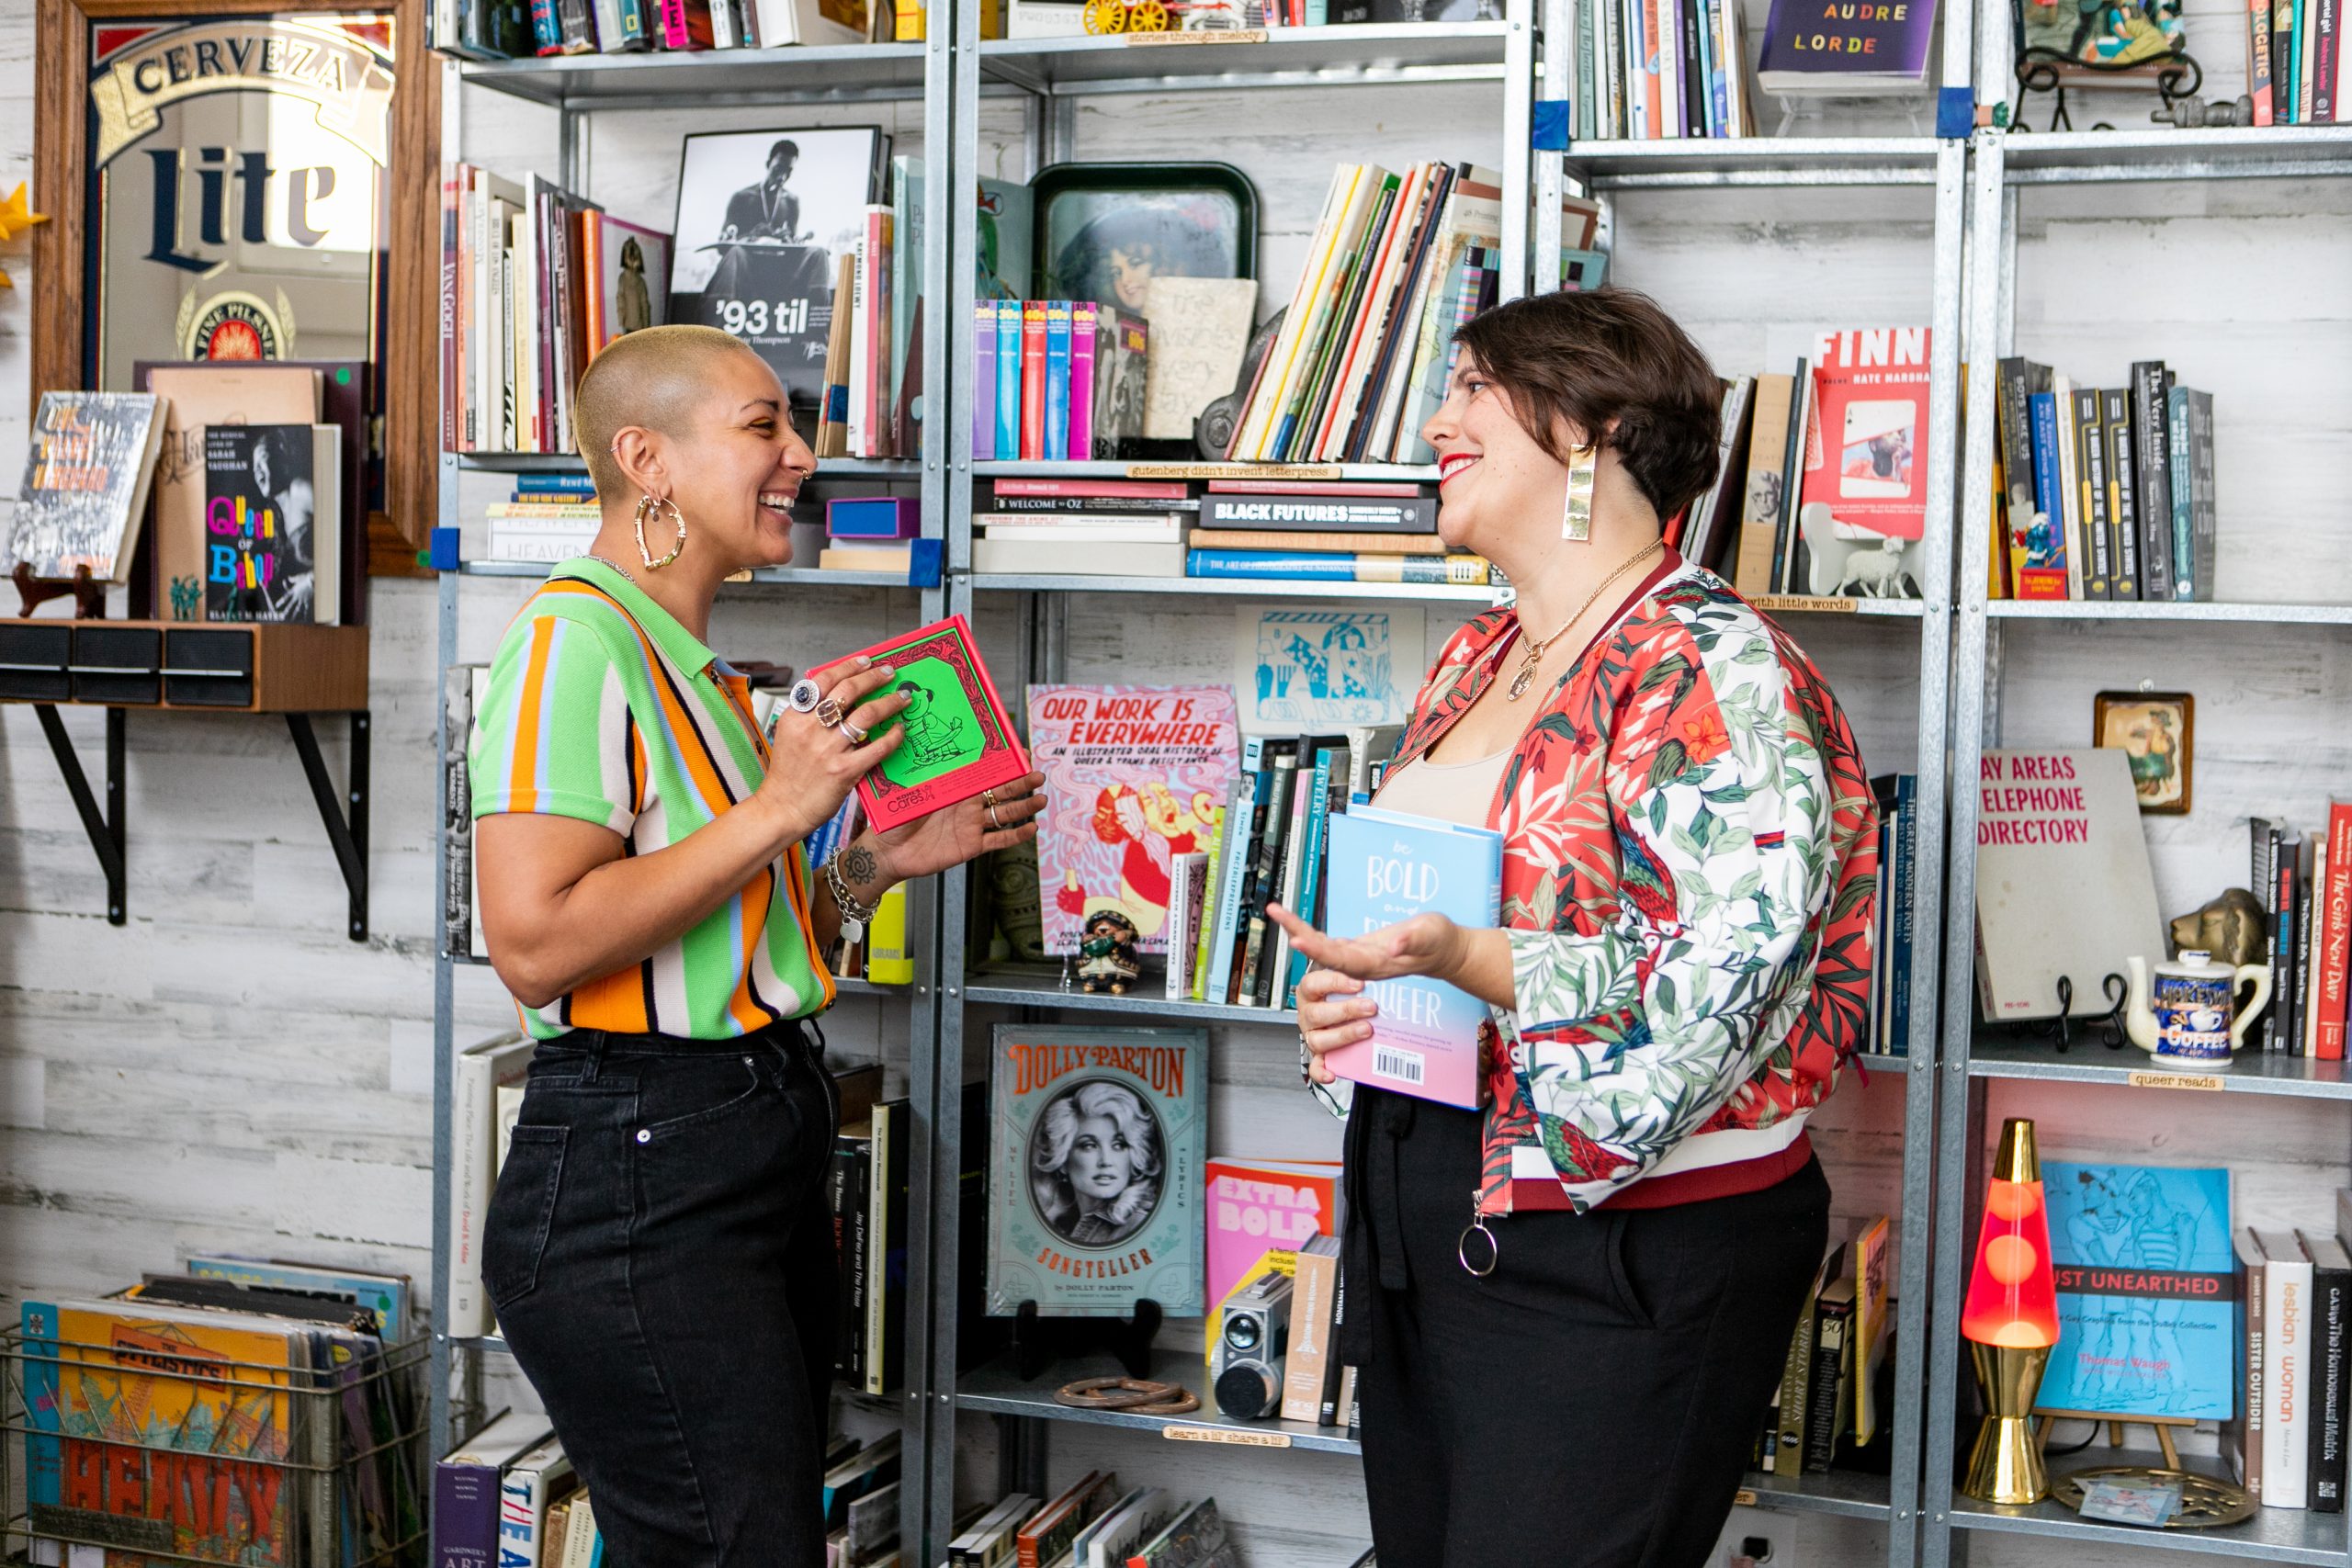 Two queer people talk in a bookstore in front of a shelf of books. One on the right has a shaved head that's died yellow and a fun lime green shirt on. The other on the right is wearing a floral pattern jacket with a book in her hand. Both are talking to each other.